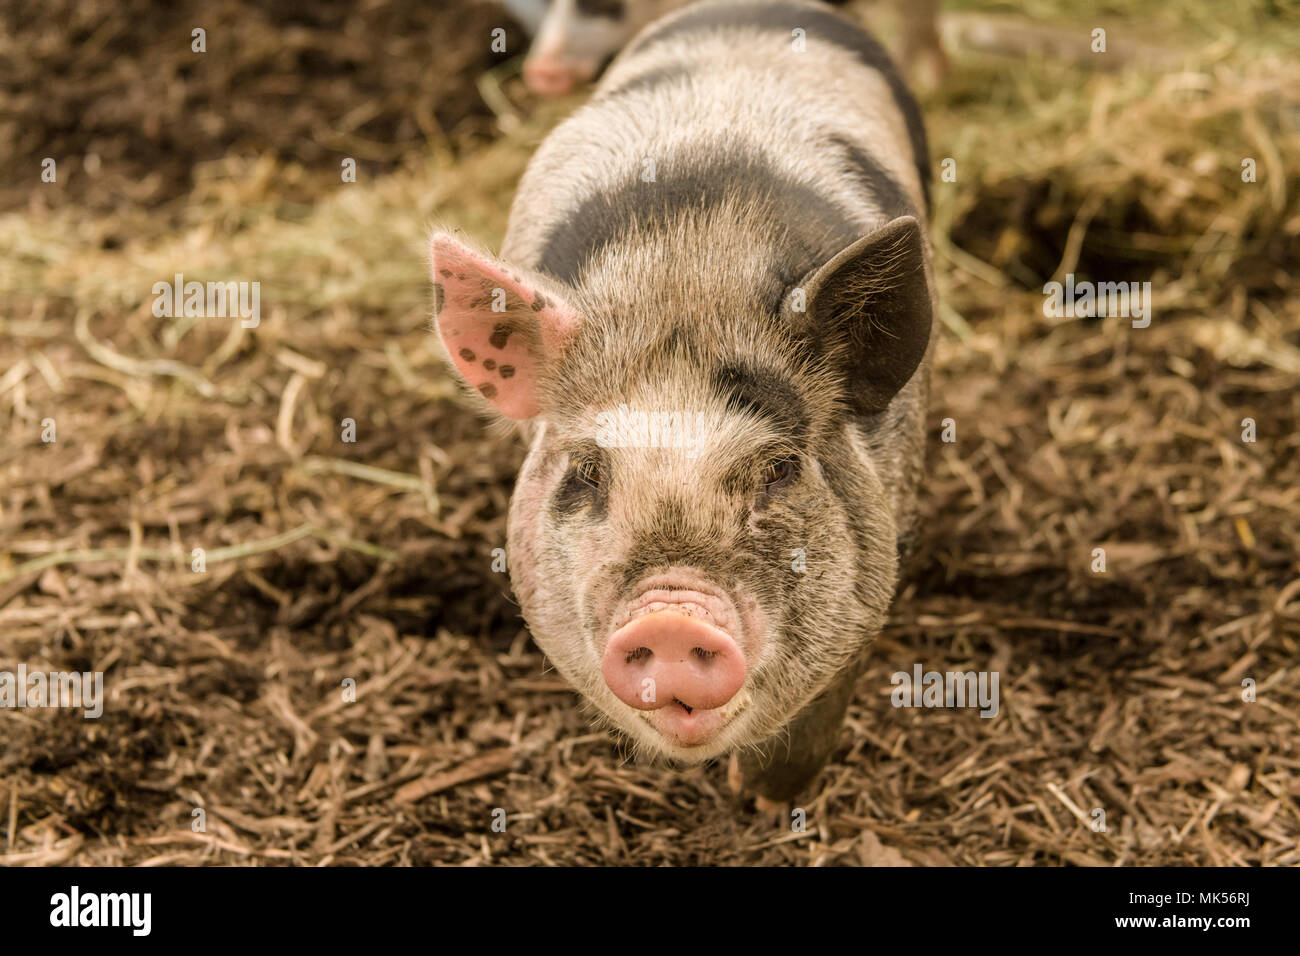 Issaquah, Washington, USA.  The Kunekune is a small breed of domestic pig with a docile, friendly nature, and are now often kept as pets. Stock Photo